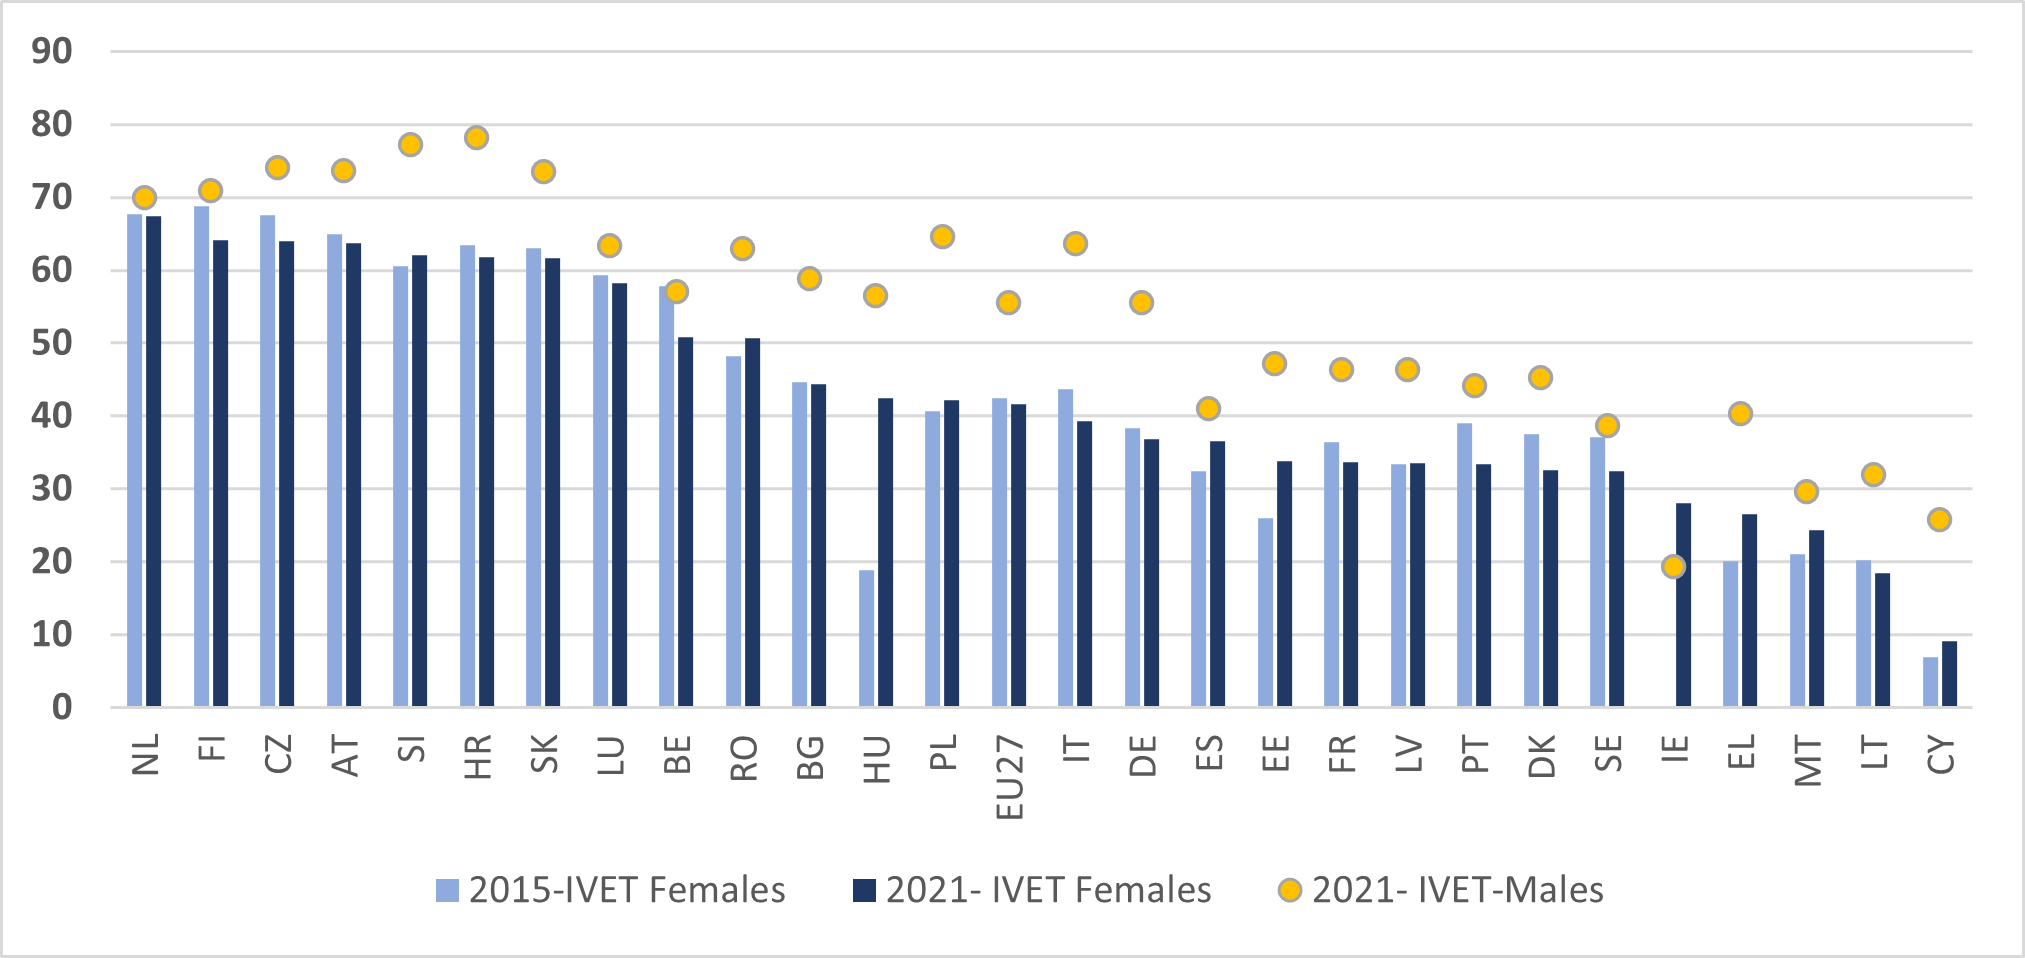 Female IVET students as % of all female upper secondary students, ISCED 3, 2015 and 2021